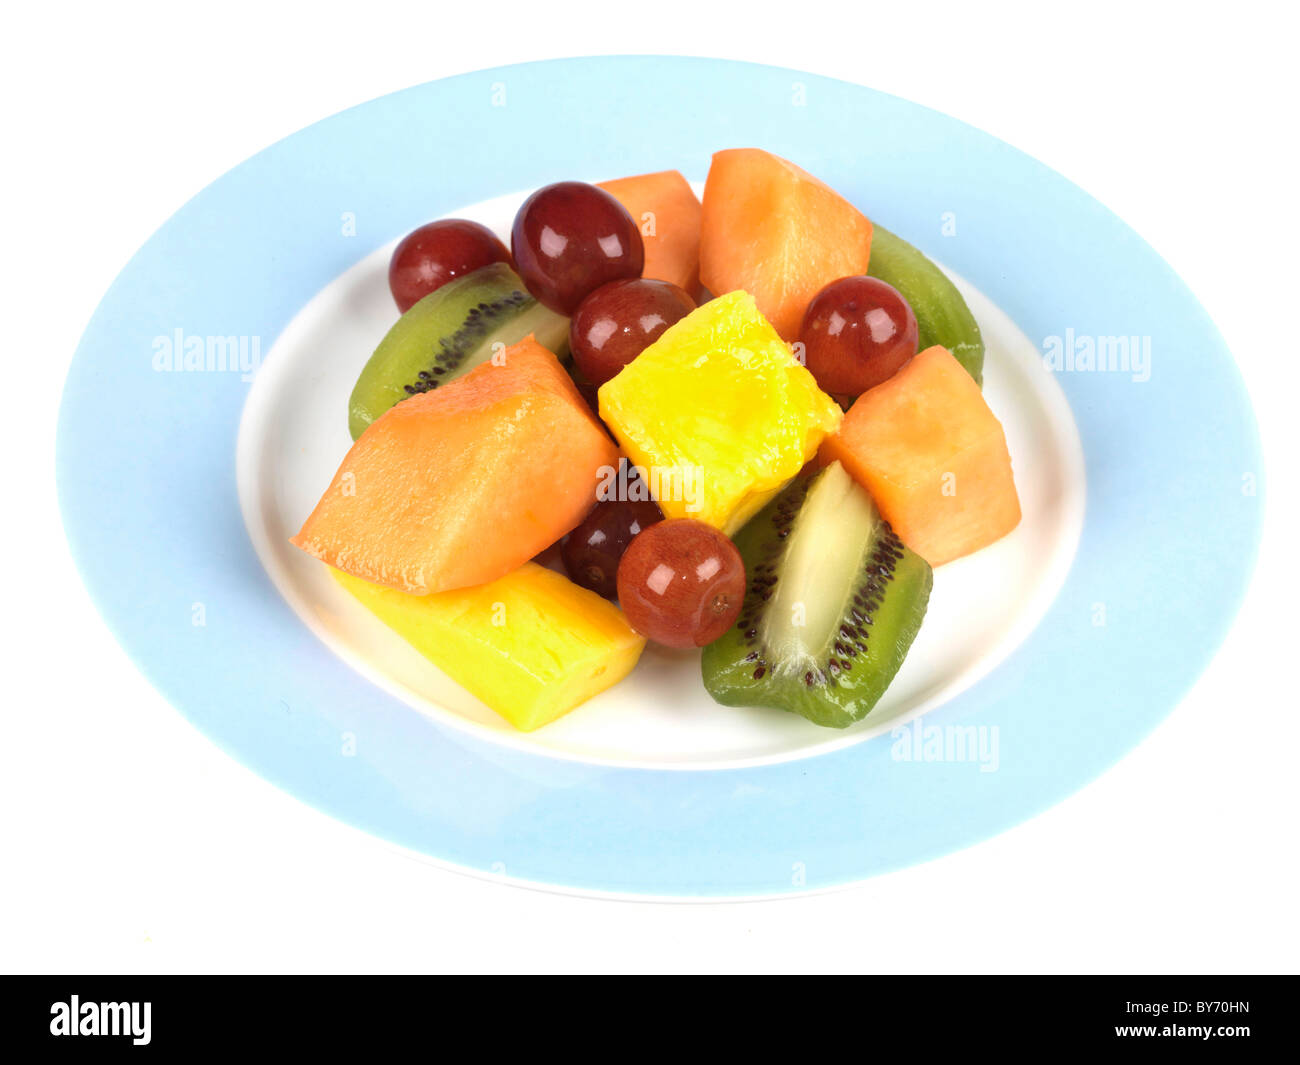 Fresh Healthy Tropical Fruit Salad Against A White Background With A Clipping Path And No People Stock Photo